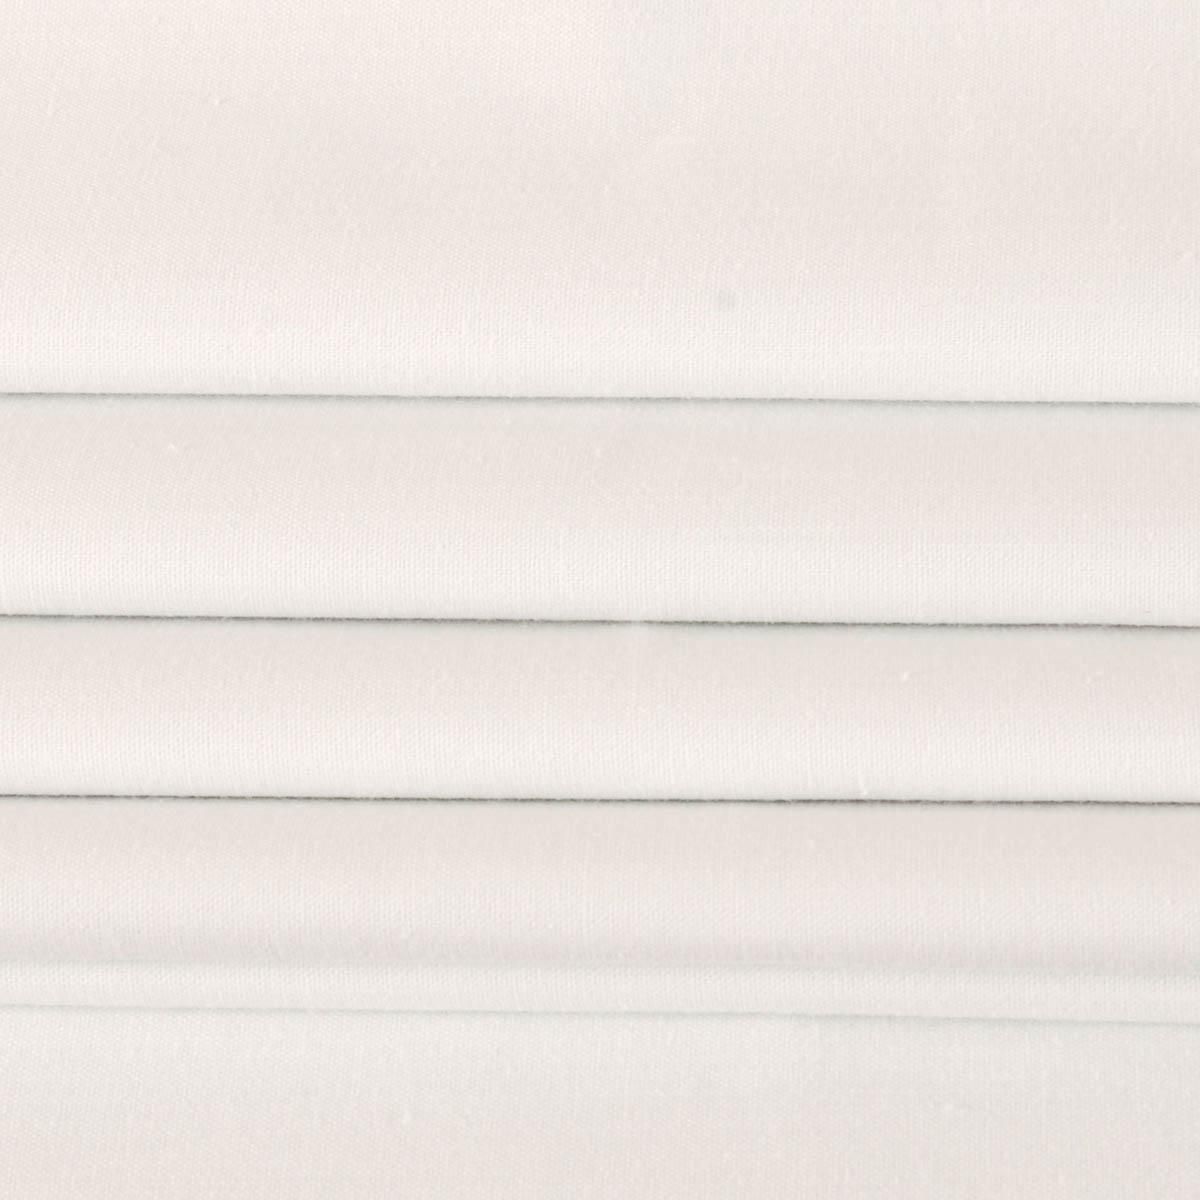 White 54 Supersoft Blackout Lining Free Uk Delivery Terrys Within Blackout Lining Fabric For Curtains (View 9 of 15)